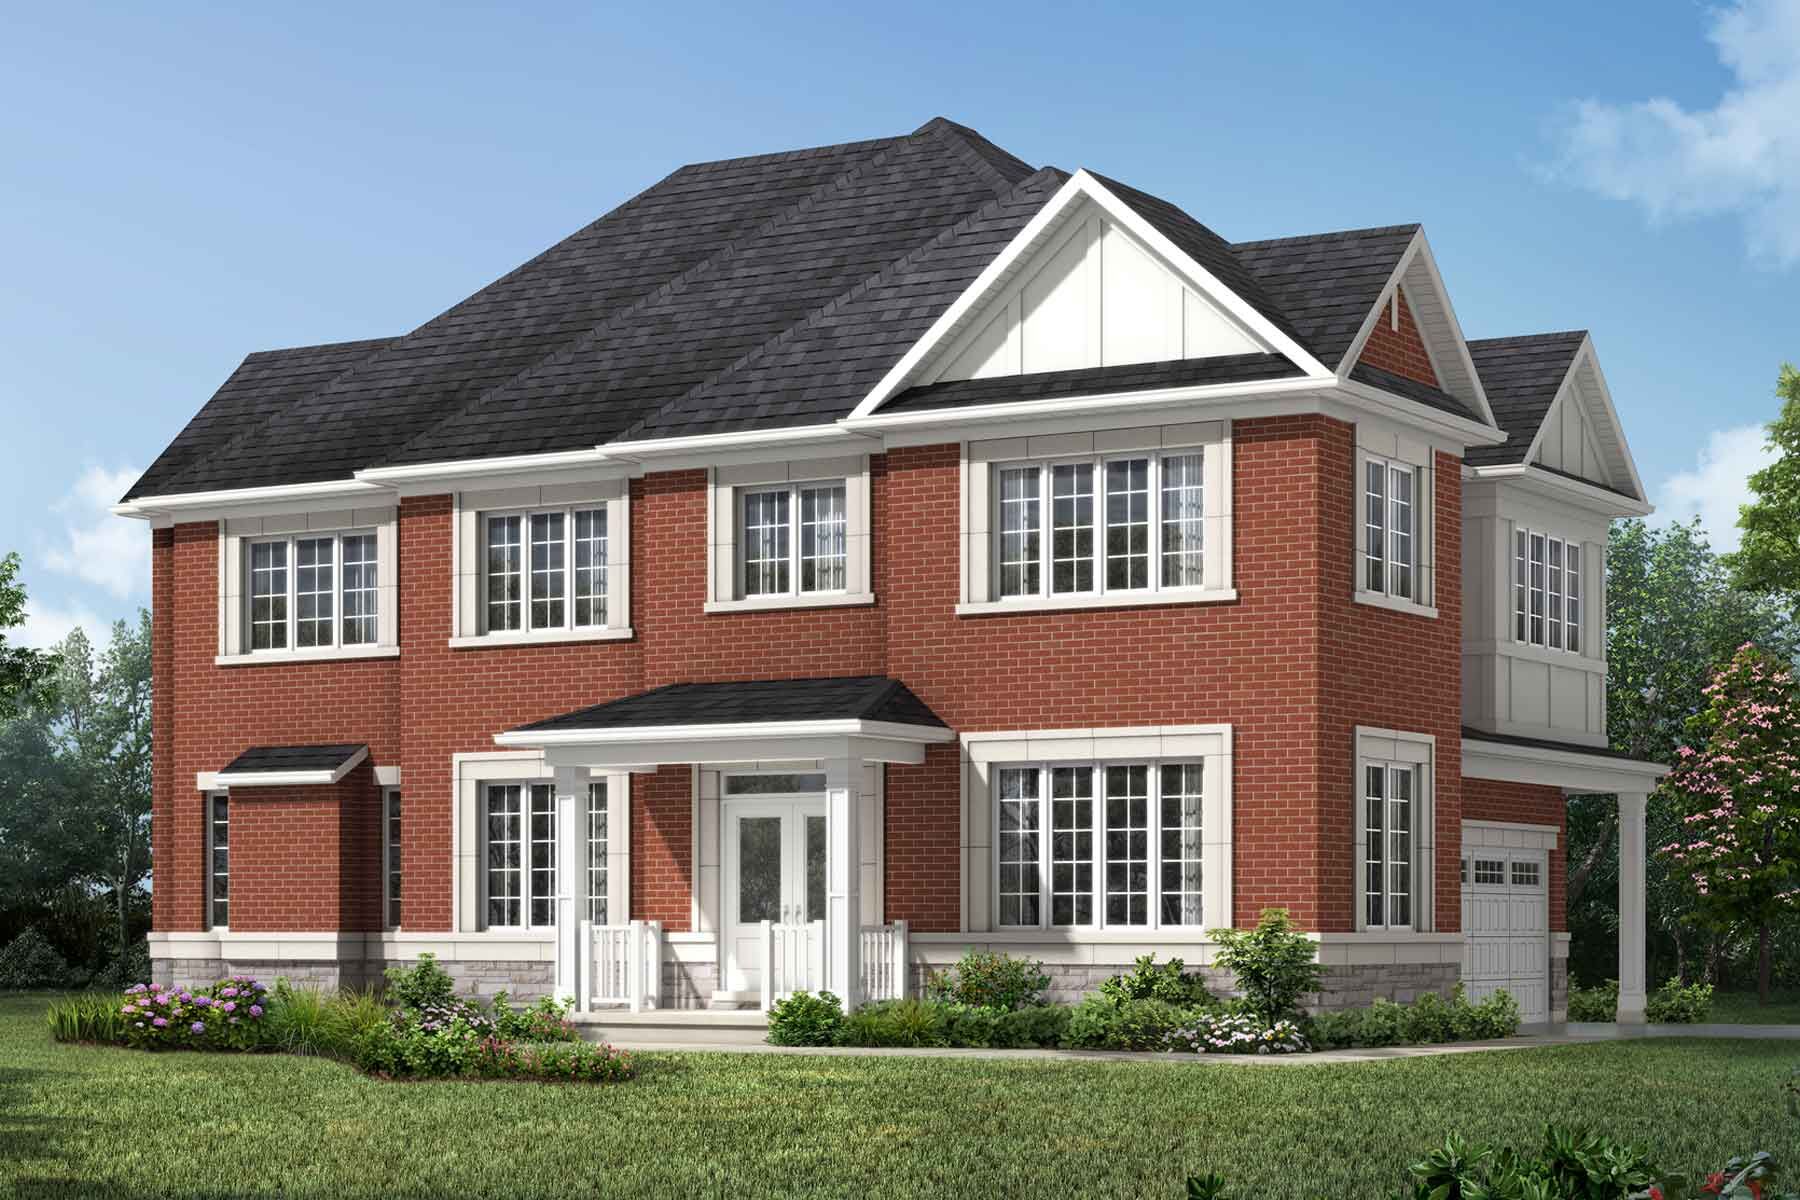 Traditional elevation for Arthur Corner with white double garage to the right and white front doors on the corner. Lots of windows, red brick and a dark roof.